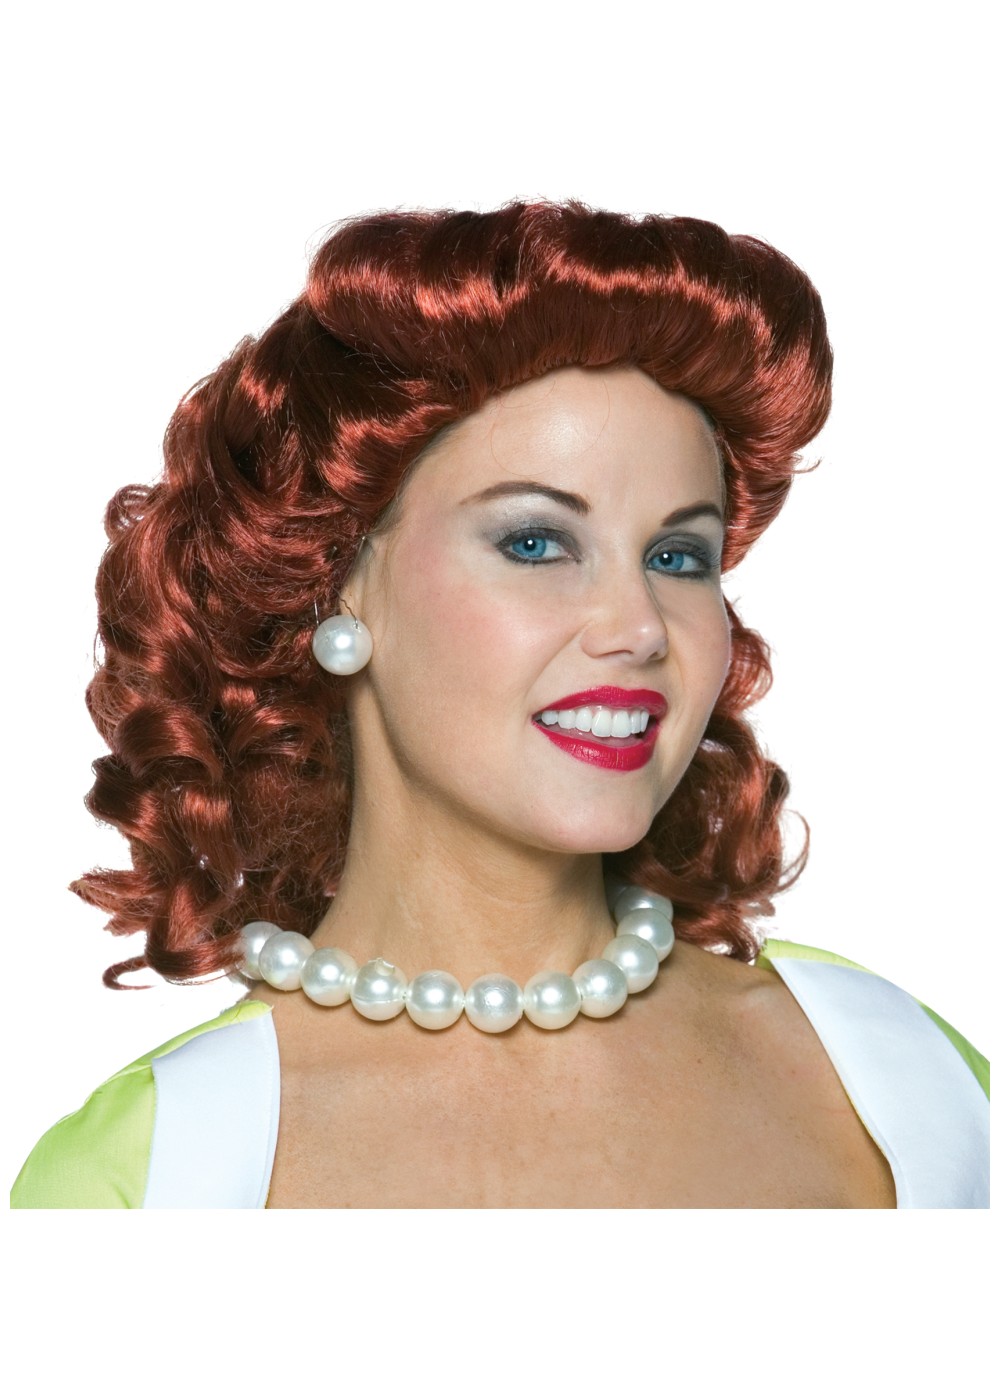 Kangaroos 50s Housewife Red Wig for Costume